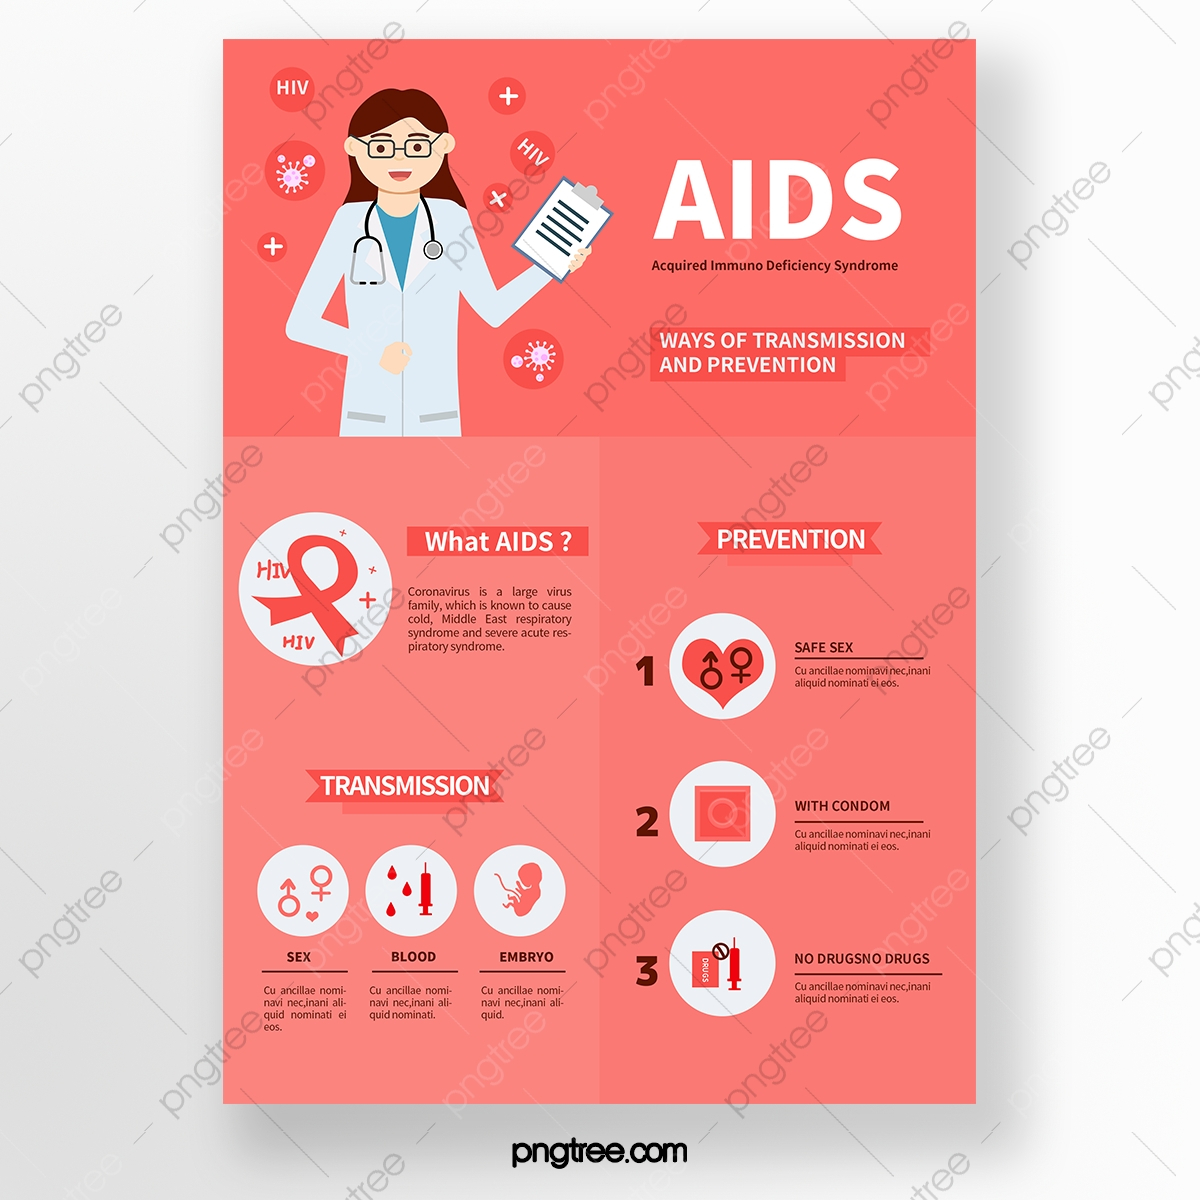 Hiv Aids PNG Transparent Images Free Download  Vector Files  Pngtree Within Hiv Aids Brochure Templates